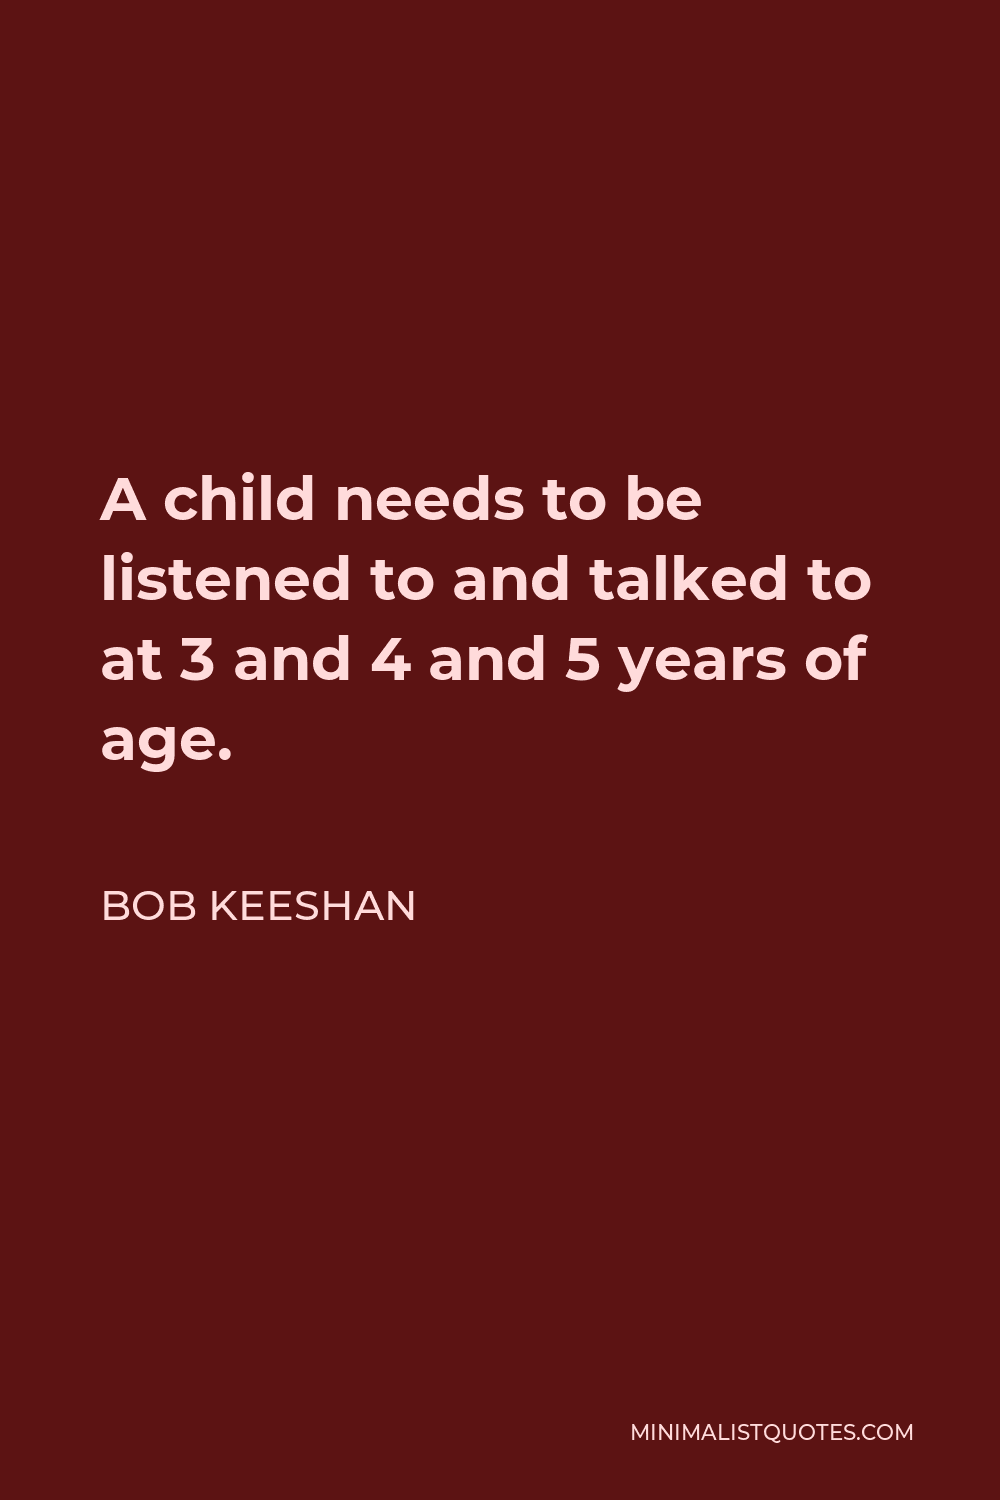 Bob Keeshan Quote - A child needs to be listened to and talked to at 3 and 4 and 5 years of age.